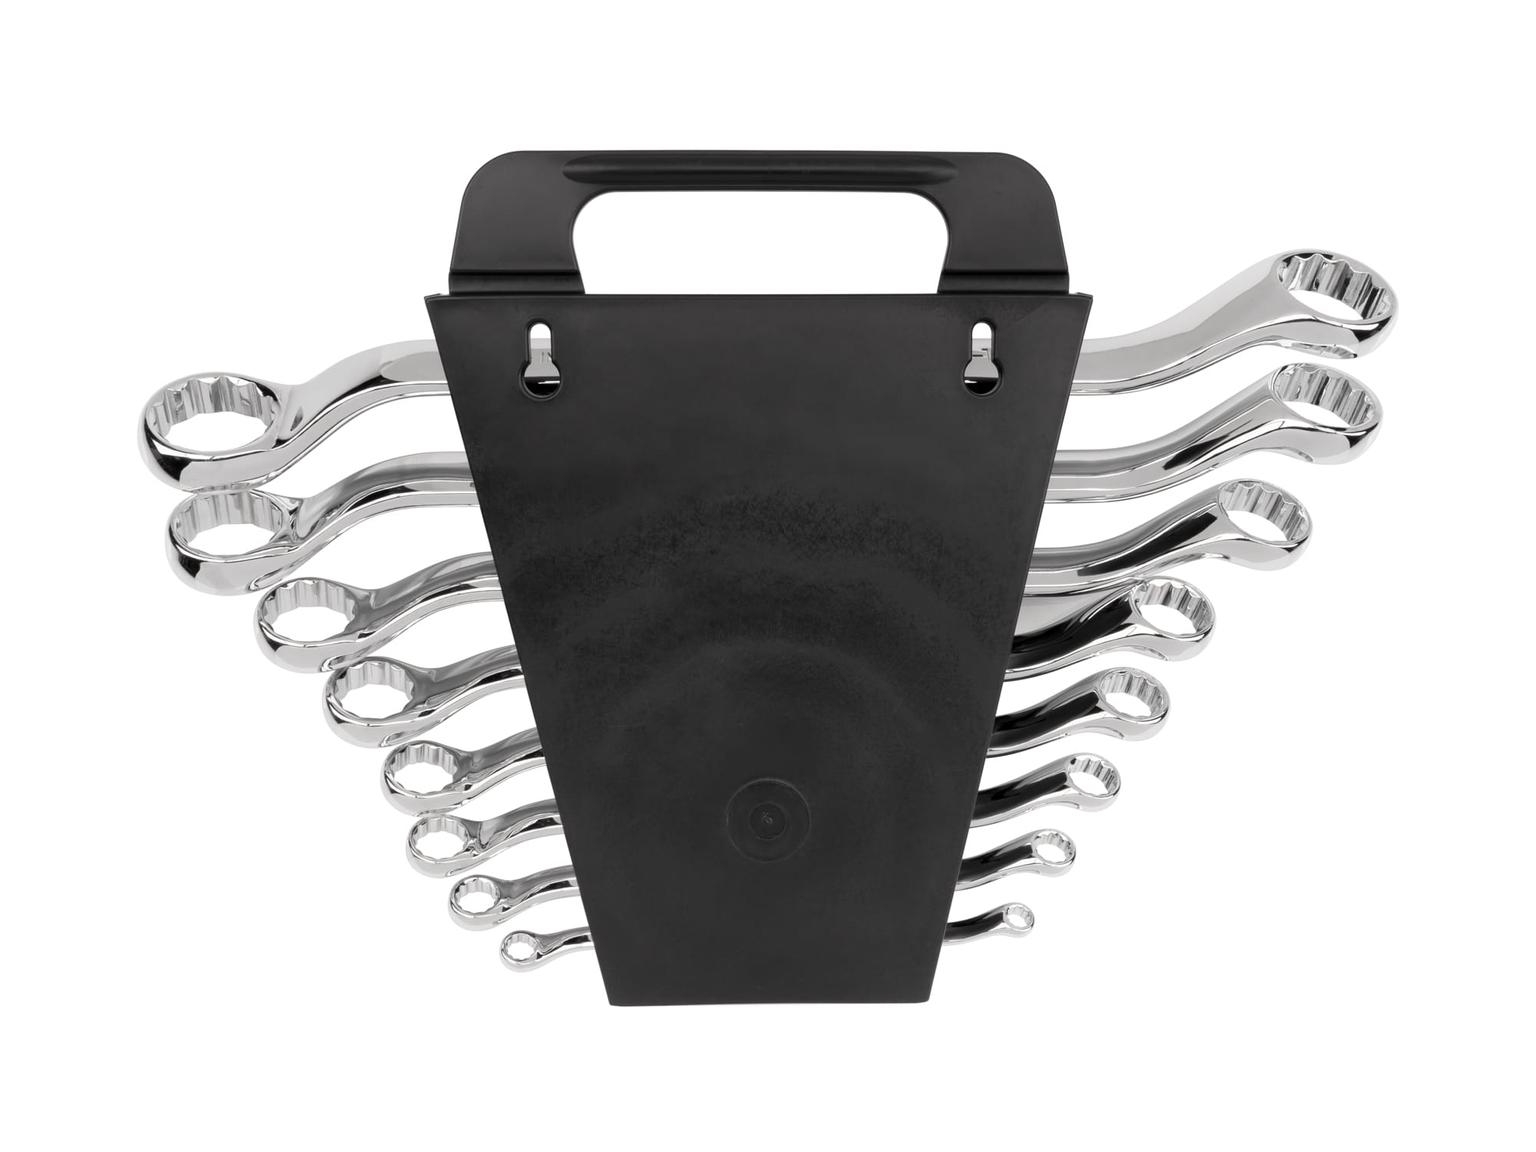 TEKTON WBE23408-T 45-Degree Offset Box End Wrench Set with Holder, 8-Piece (1/4 - 1-1/4 in.)